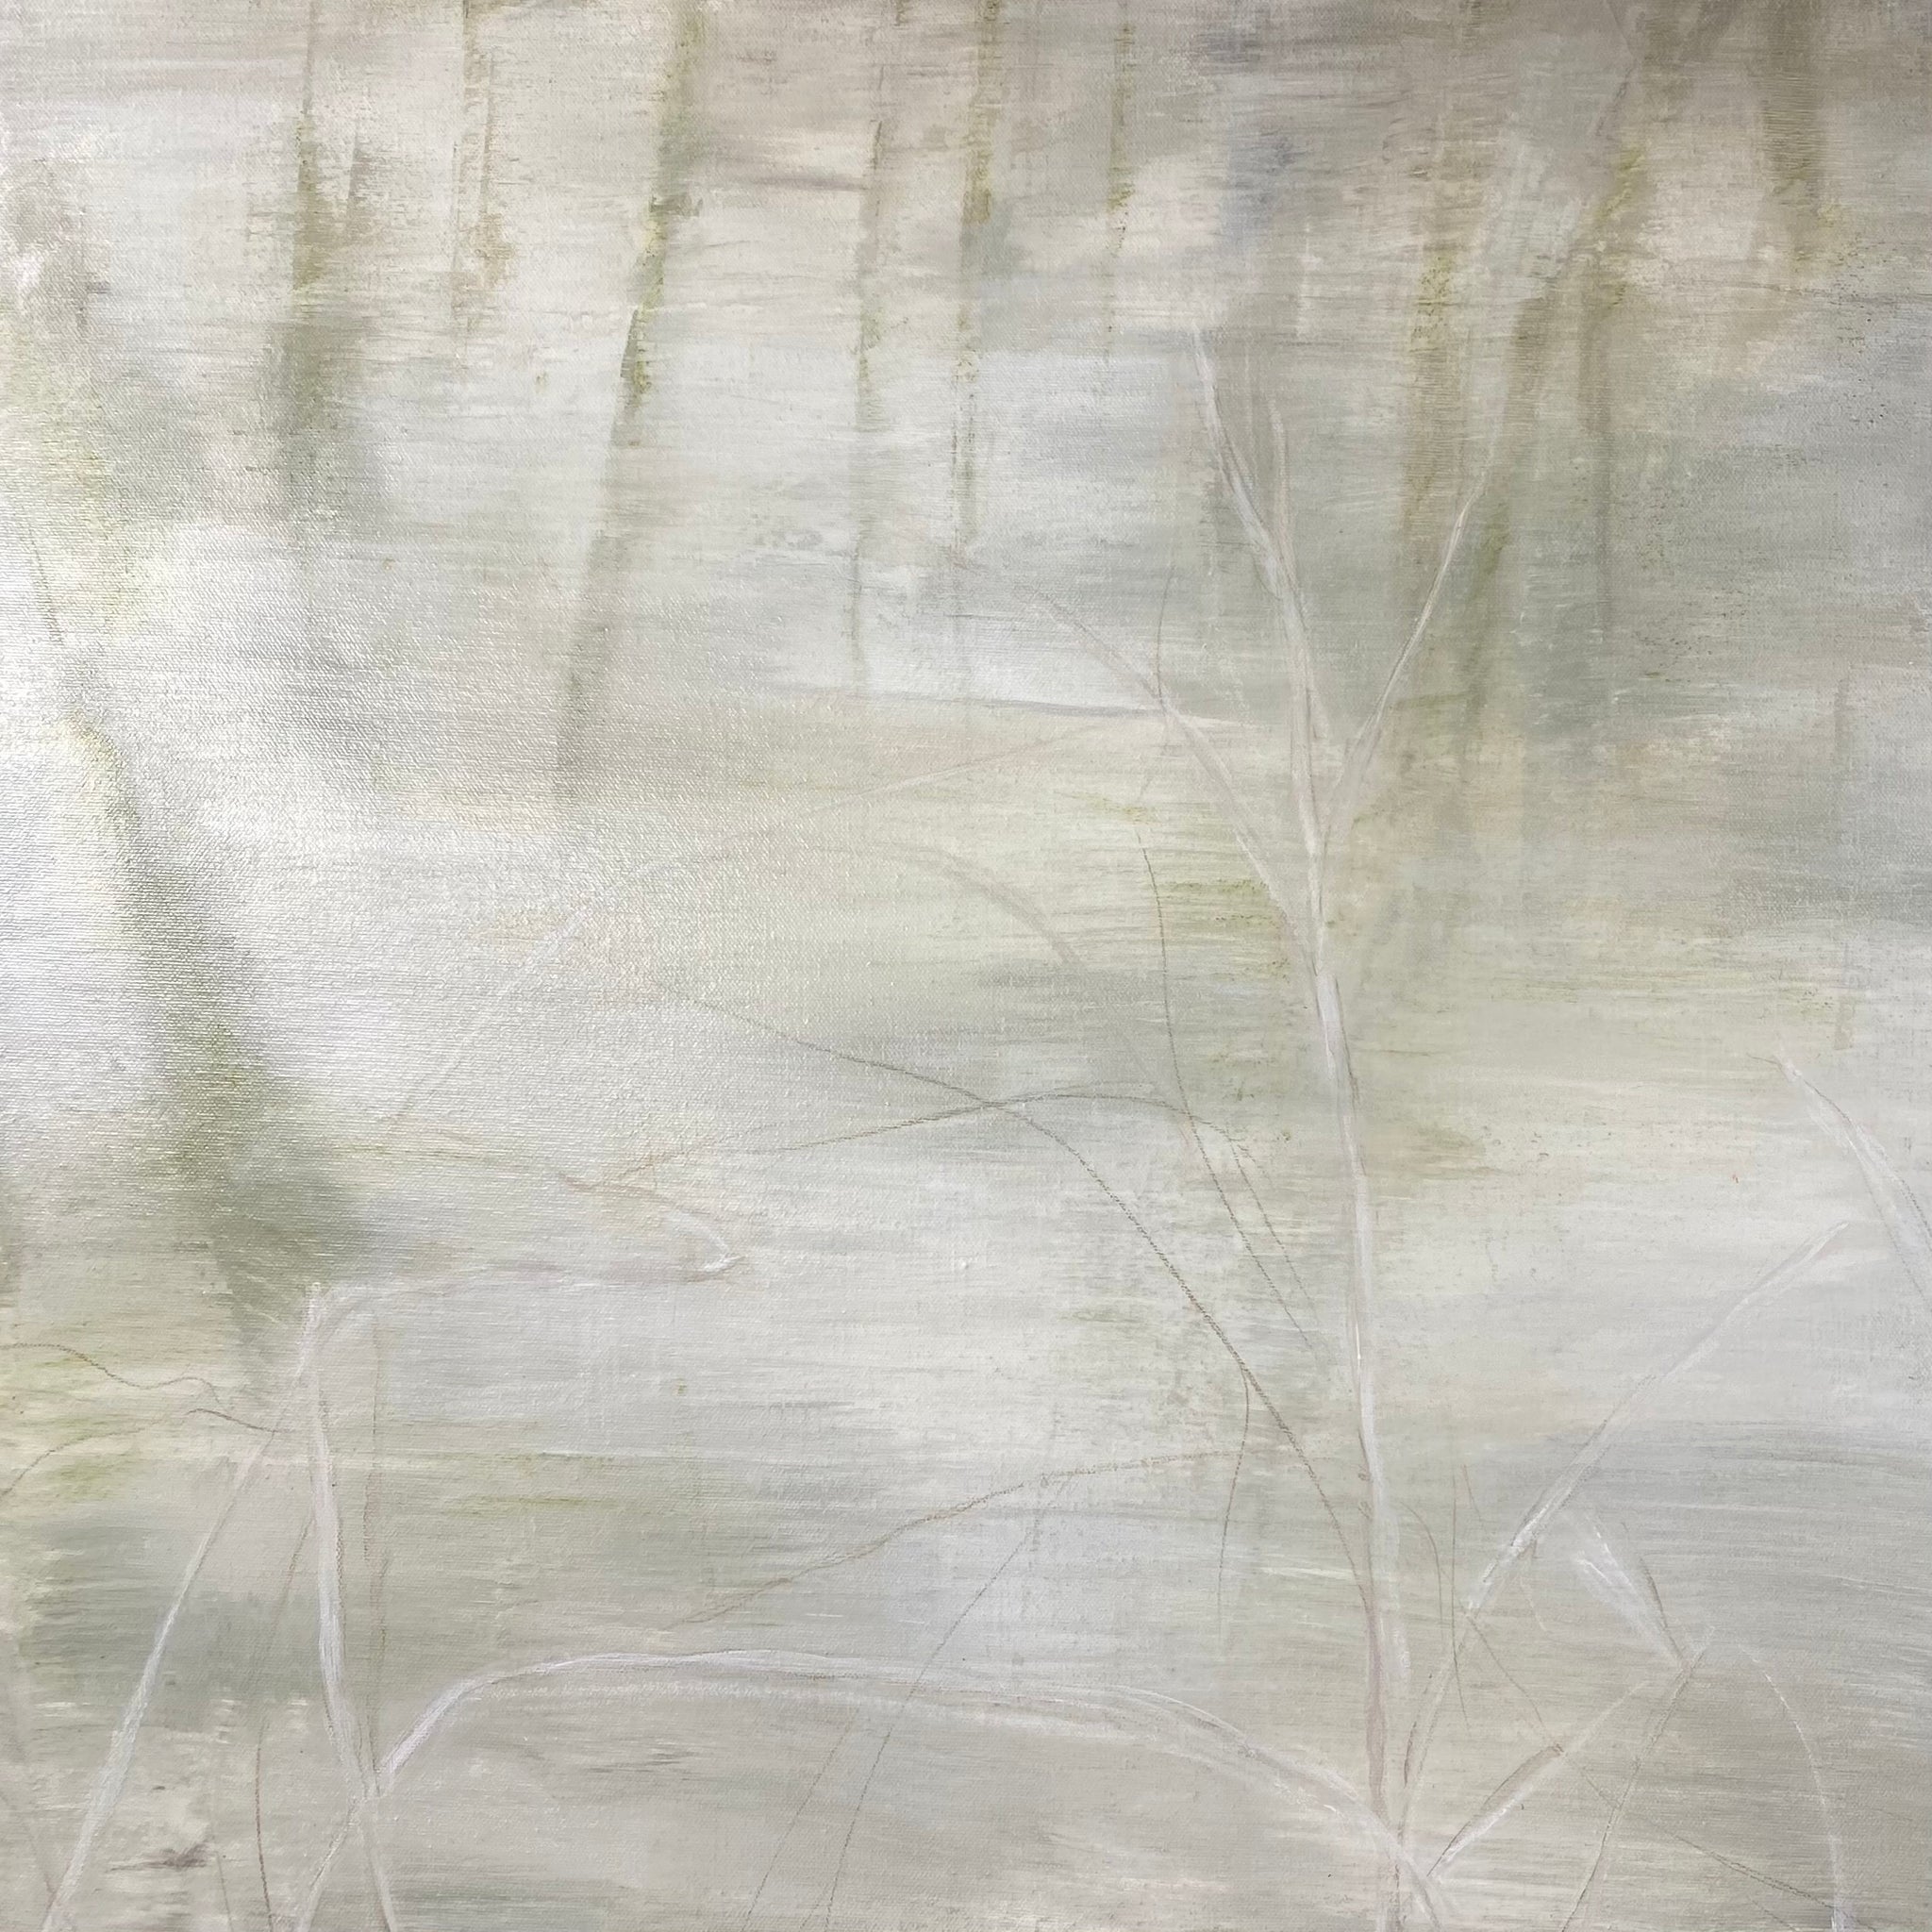 Juanita Bellavance, White on white, From the Chestatee River portfolio, 2021, Acrylic on canvas, 24 x 24 inches.